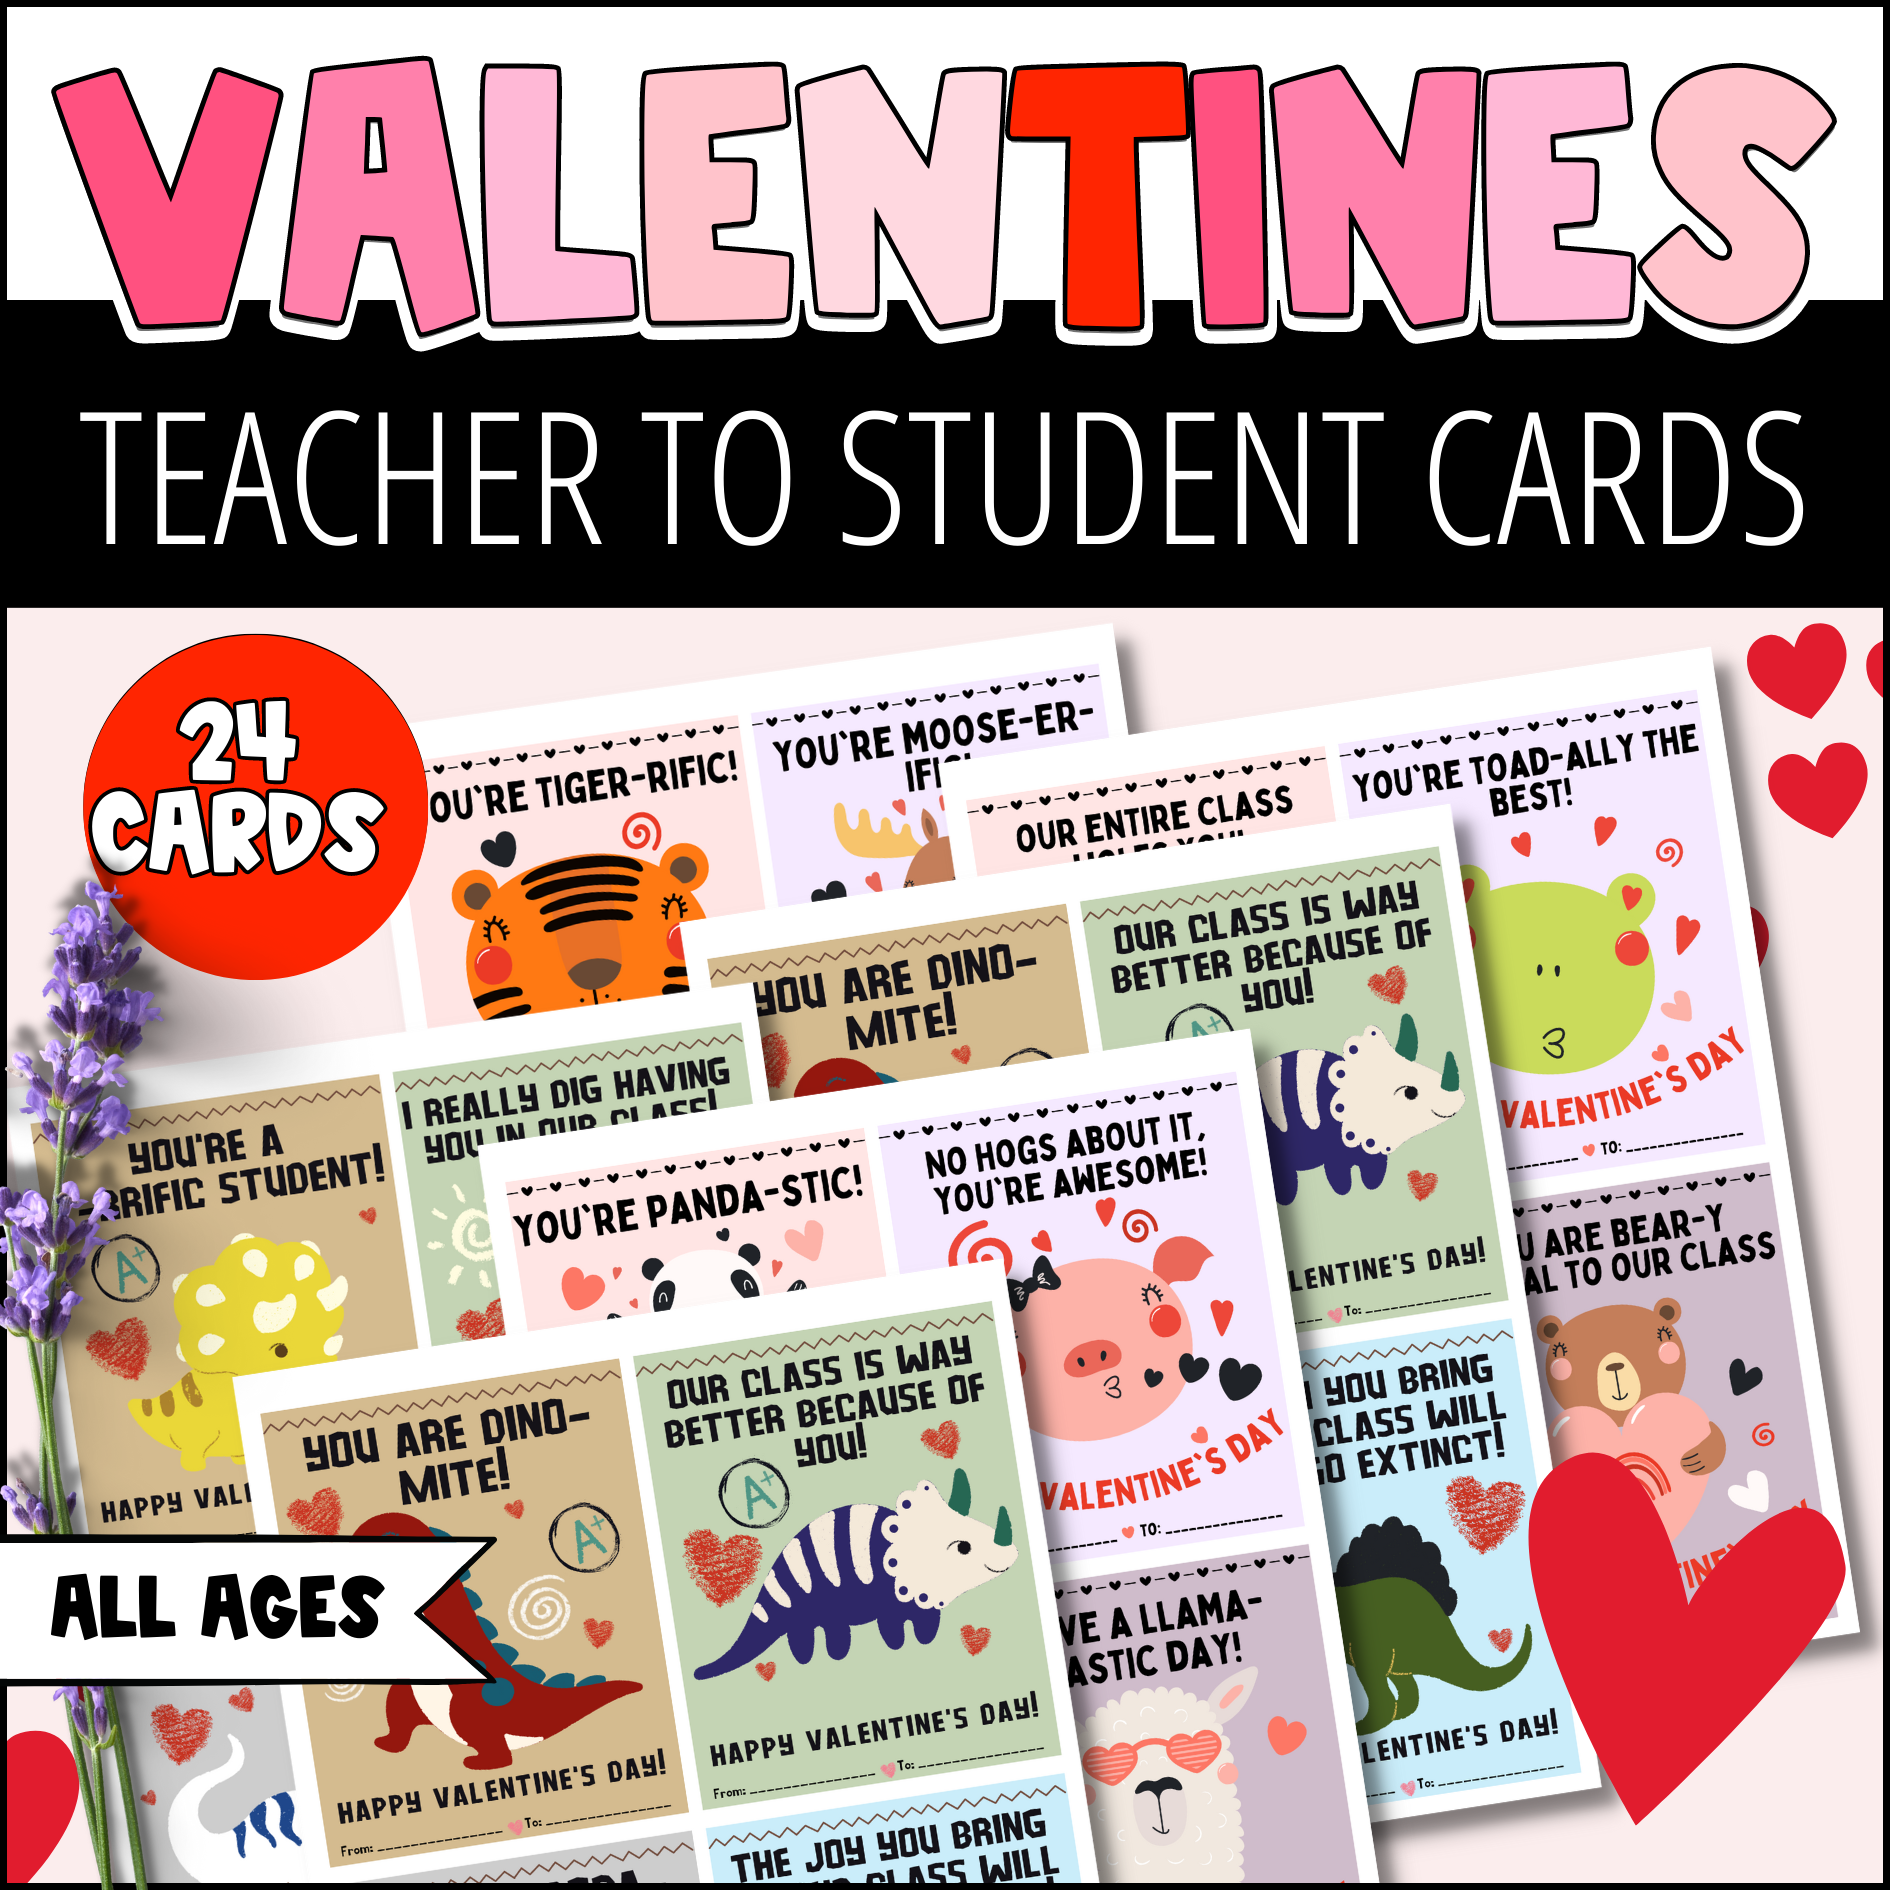 Valentines Cards for Kids School, Valentines for Class, Teacher Valentines, Valentines  Kids Classroom, Valentines Day Classroom Gifts 